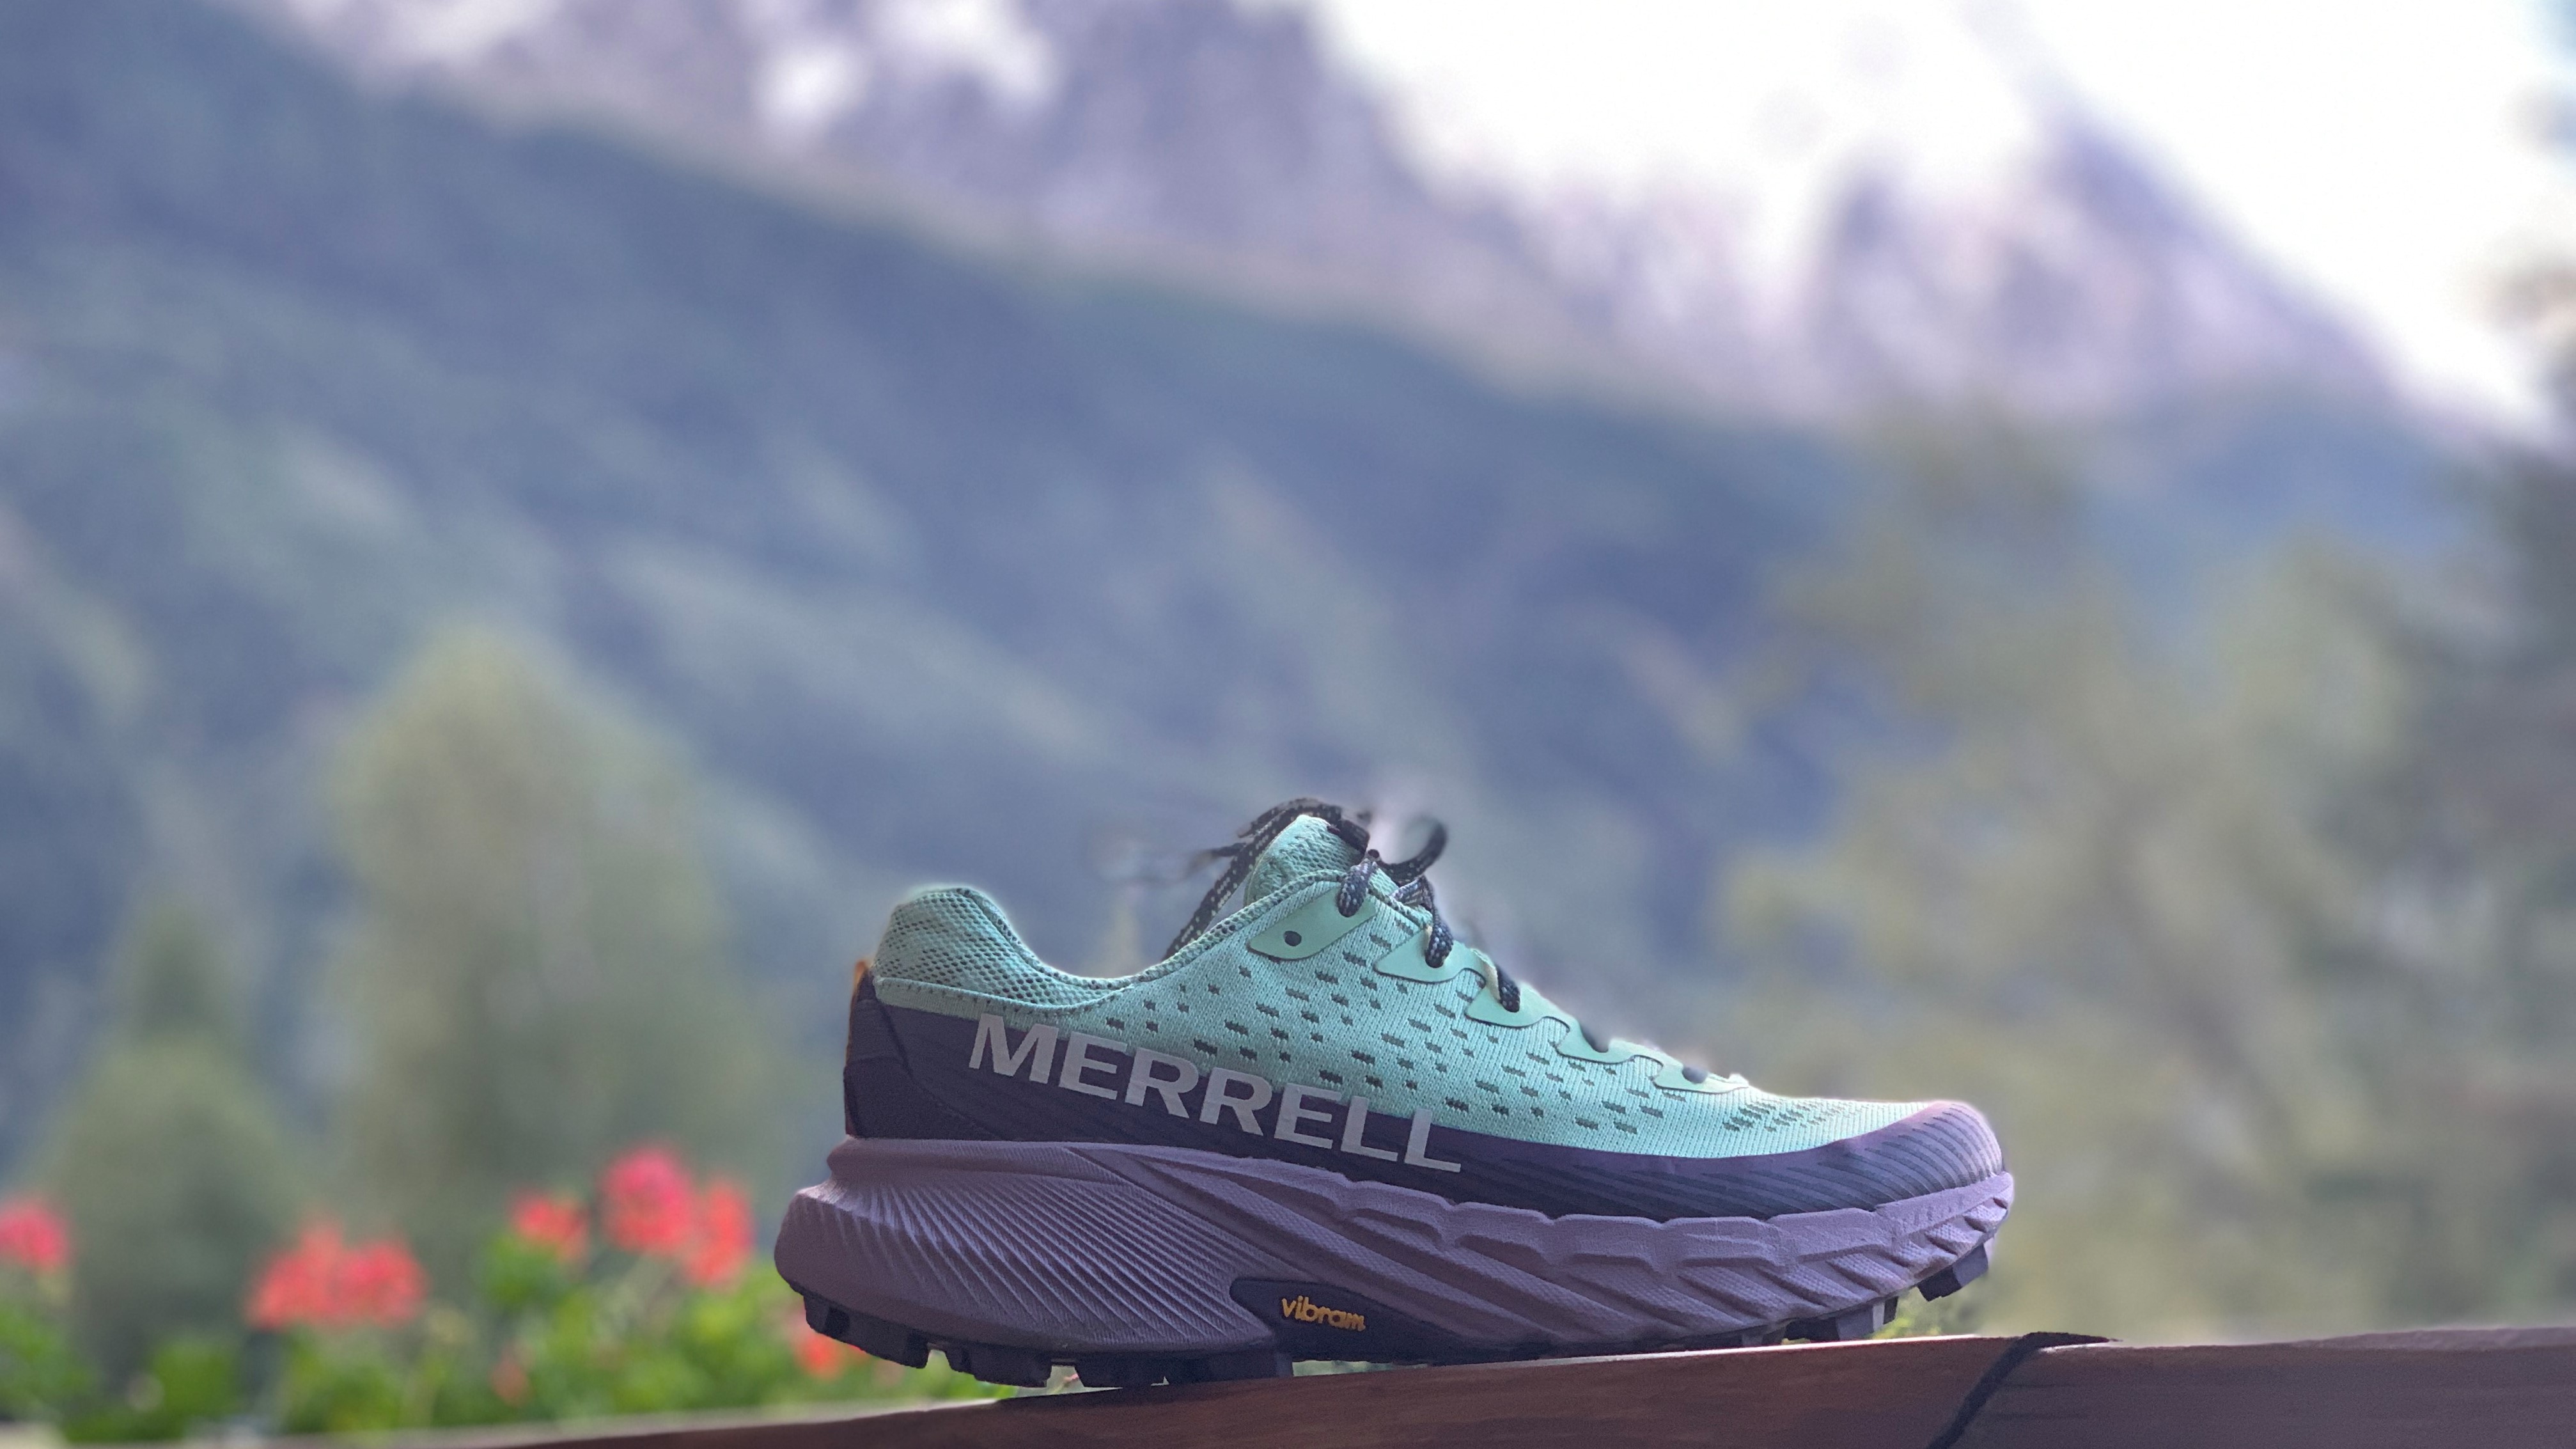 I went trail running in the Alps to test how tough Merrell's